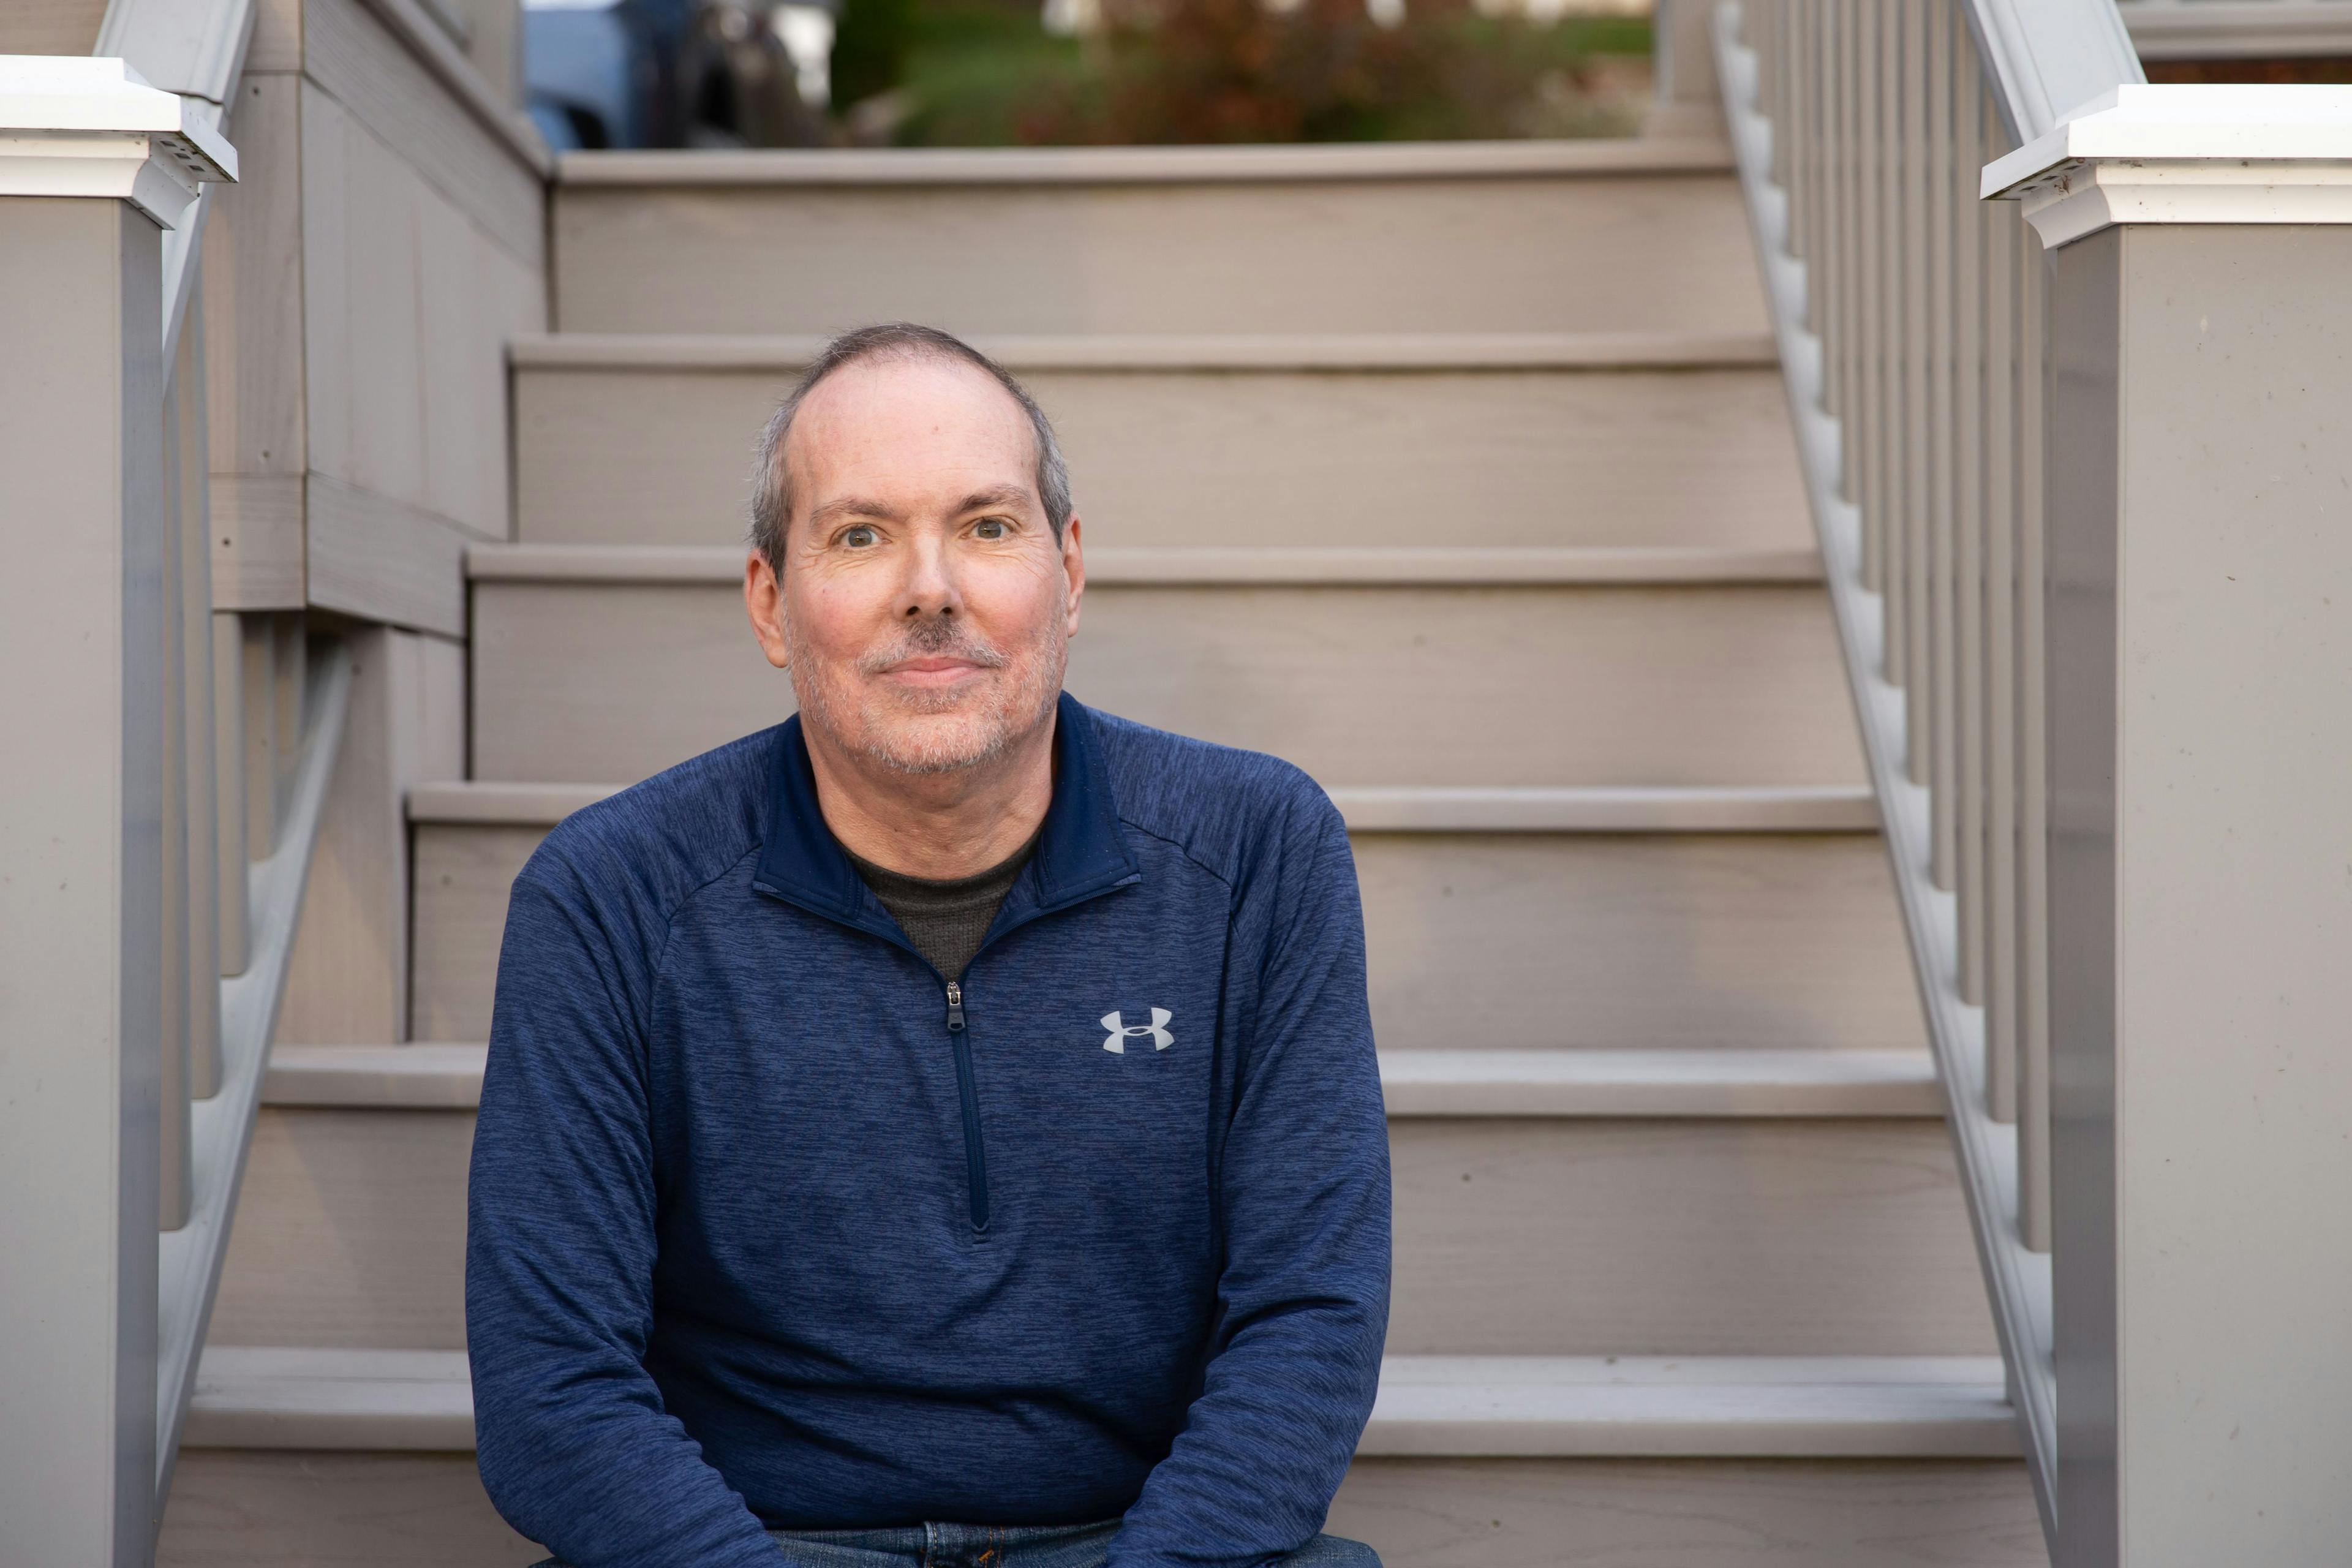 A photo of Jeff Battles wearing a blue sweater, sitting on stairs